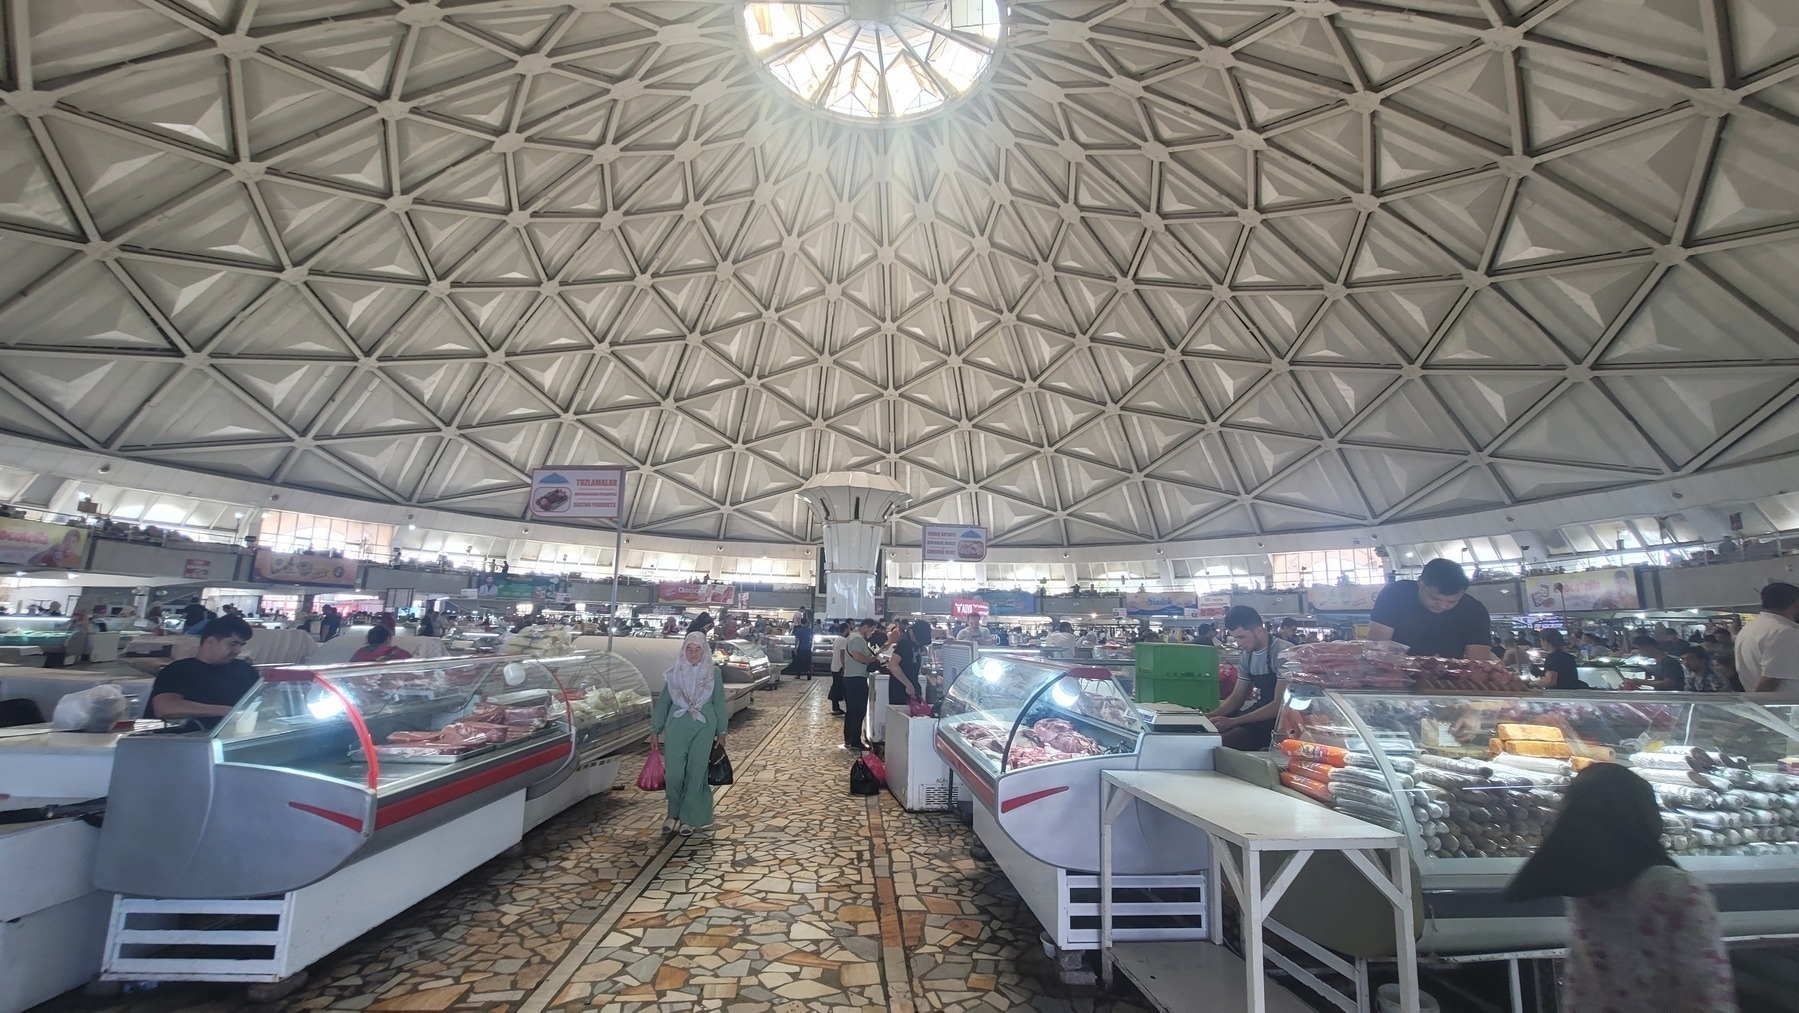 food vendors inside a large building with a dome